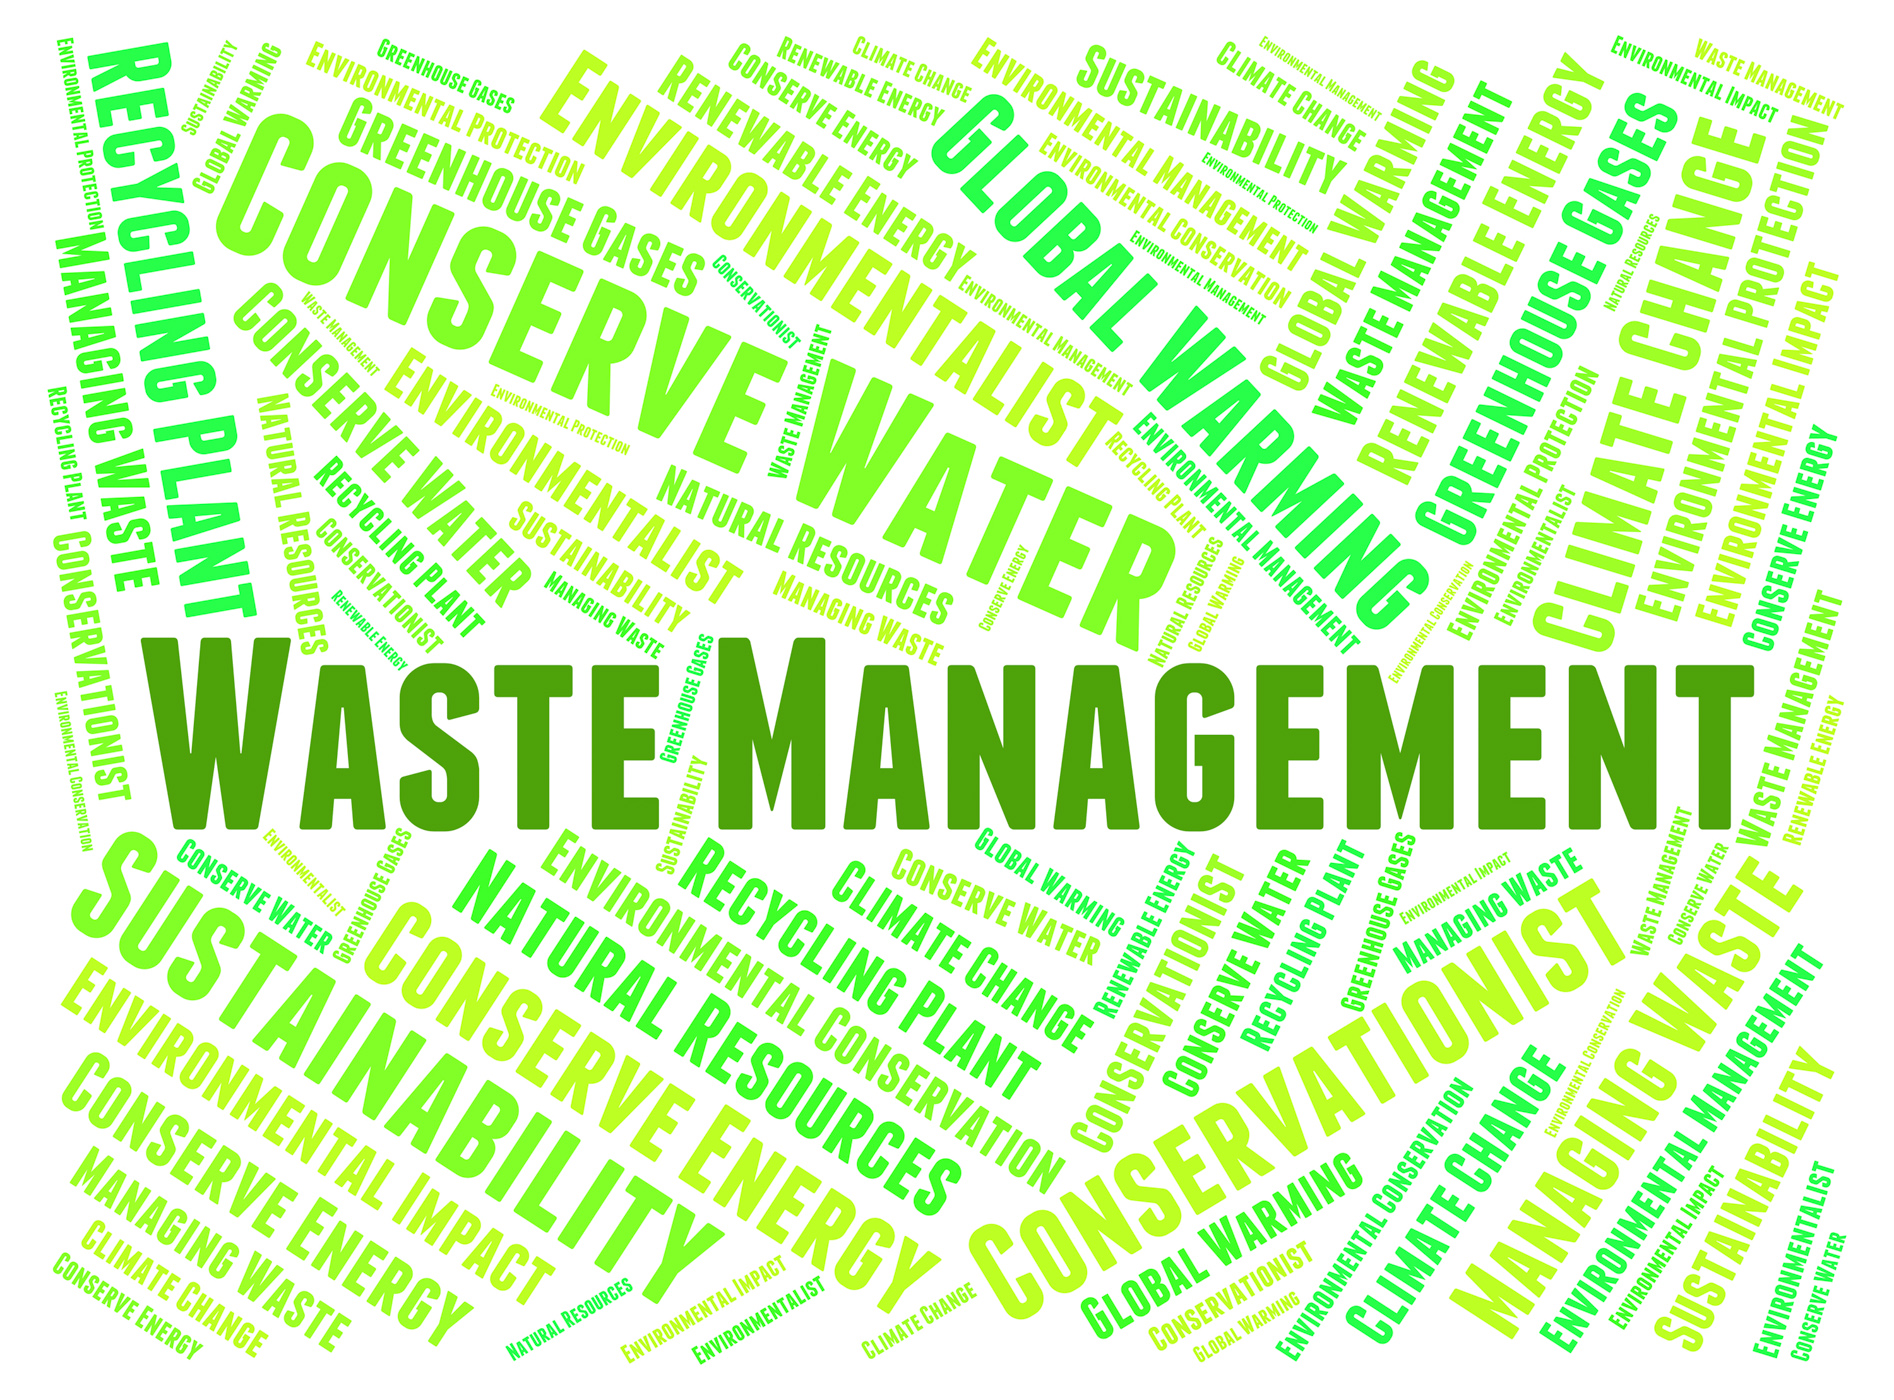 Waste management means get rid and disposal photo